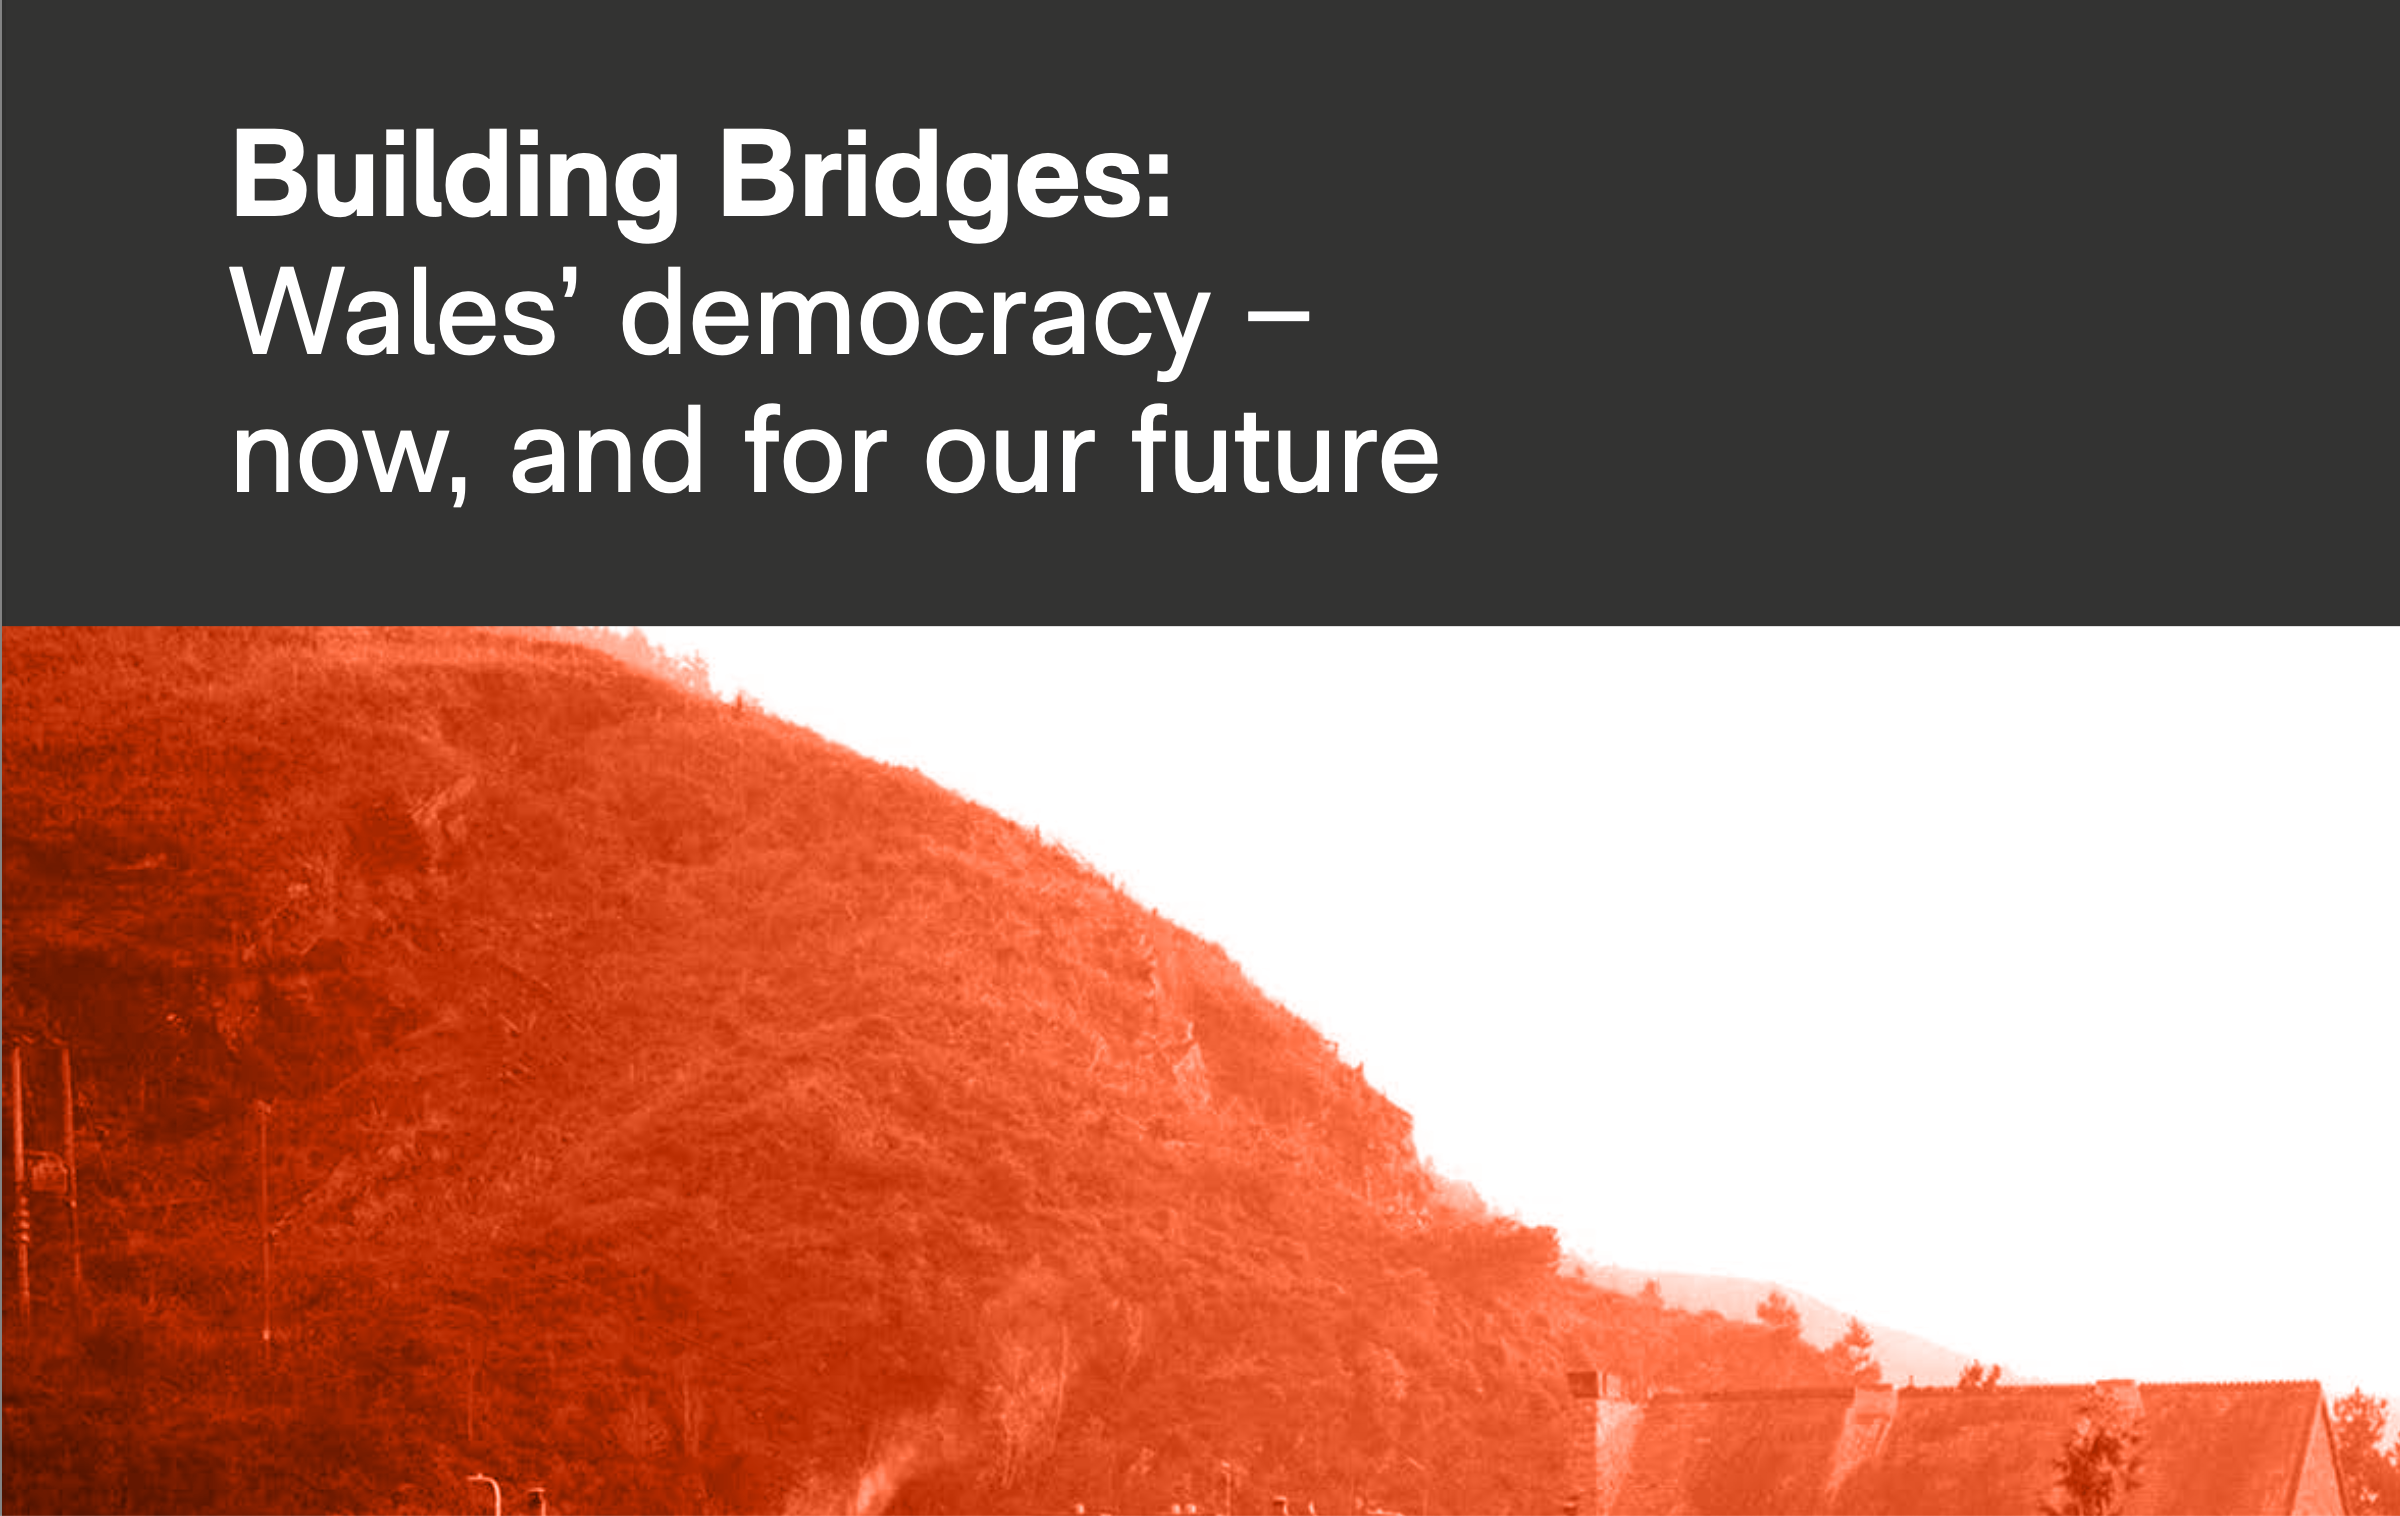 The cover of Building Bridges, the IWA's new report on democracy in Wales